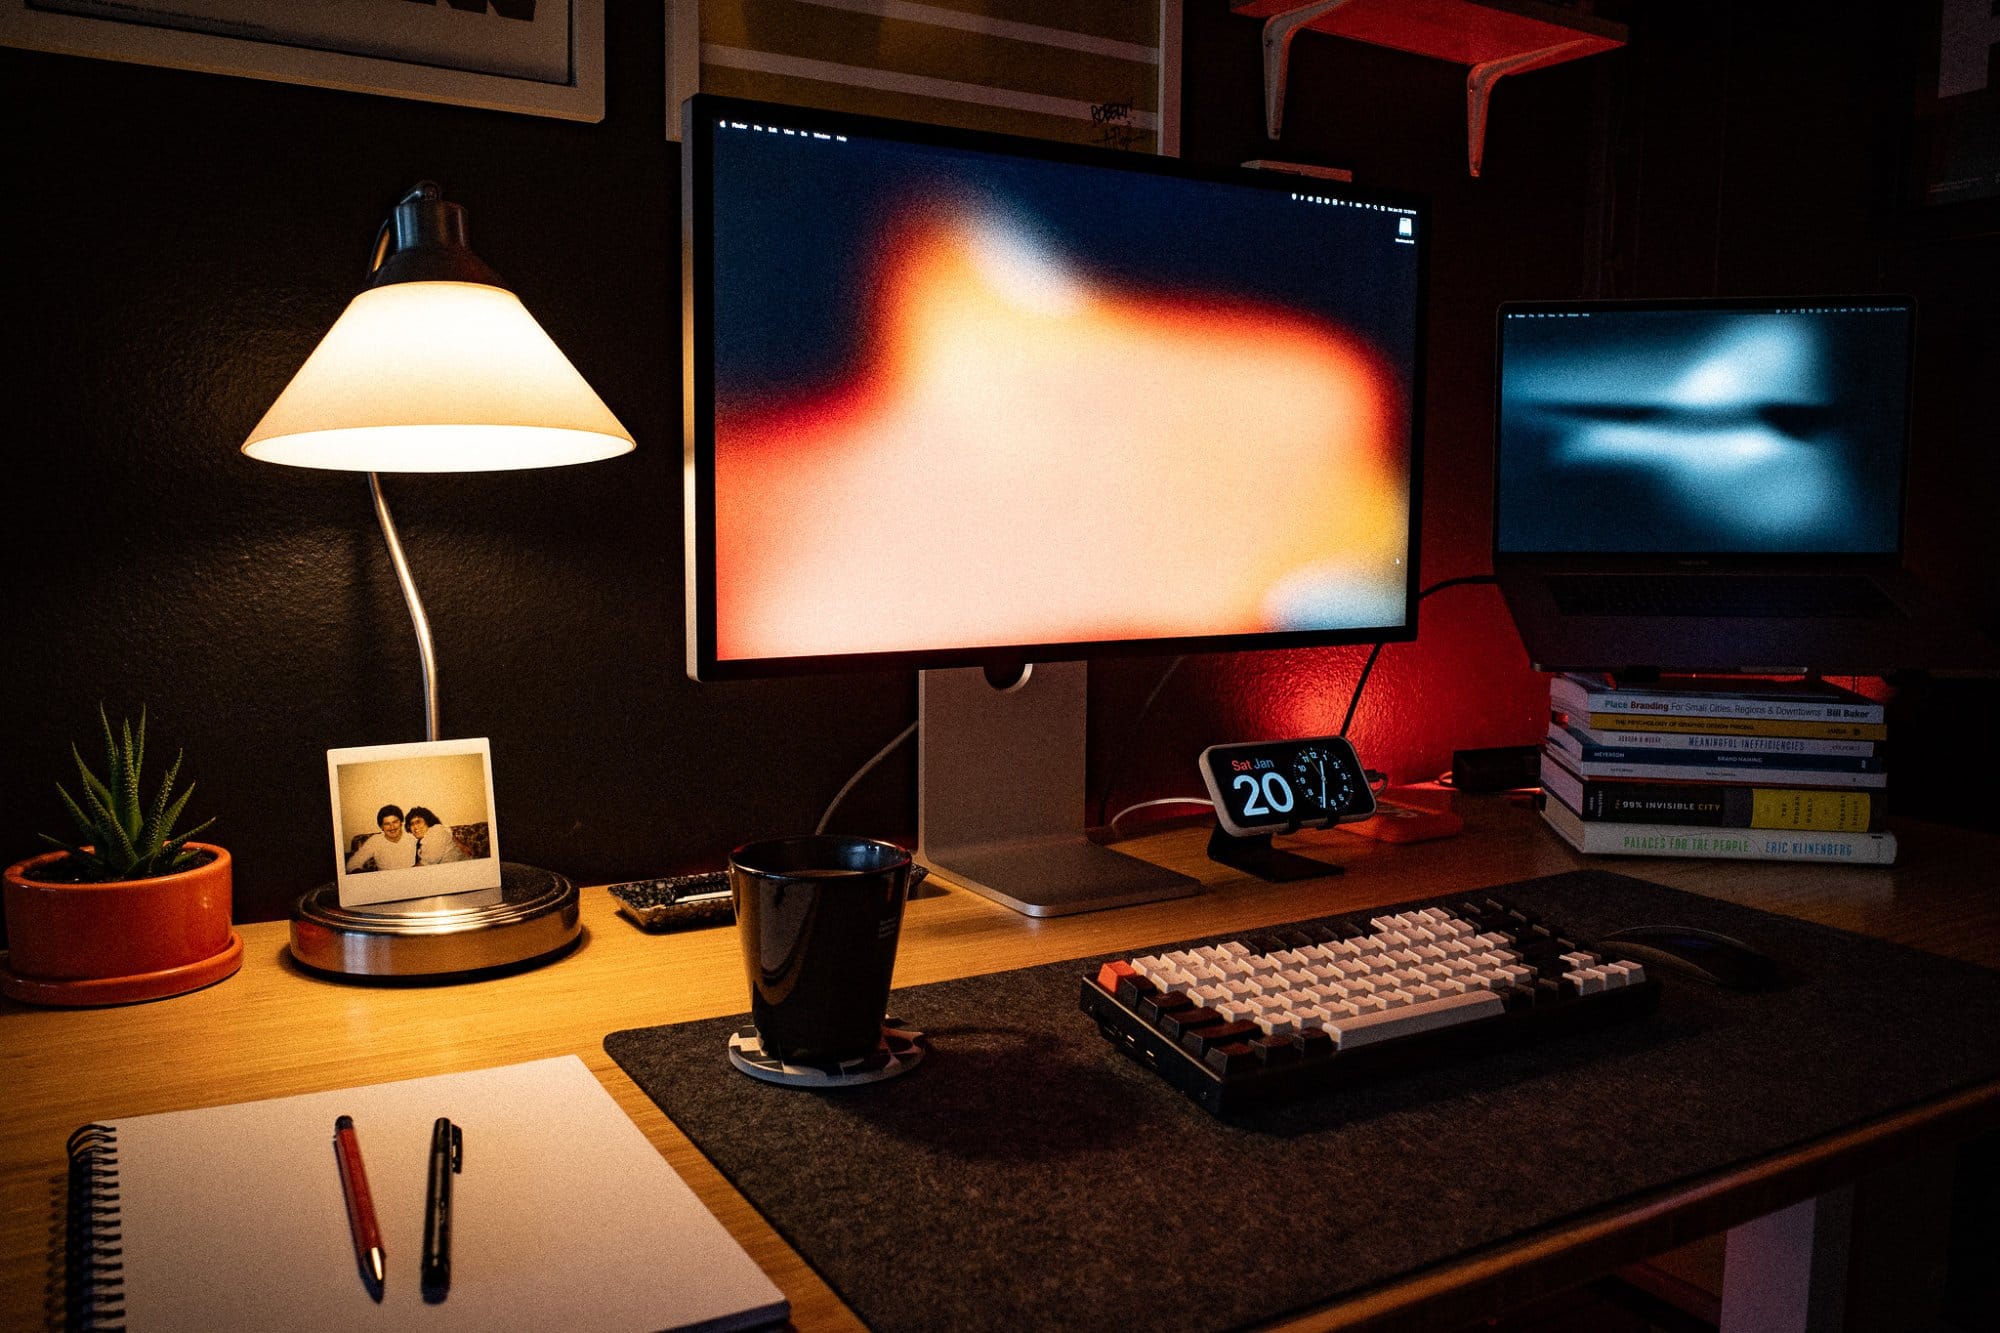 A cosy and inviting desk setup with a lamp, an Apple Studio Display, a MacBook, a mechanical keyboard, and a mug, complemented by a plant and personal photo